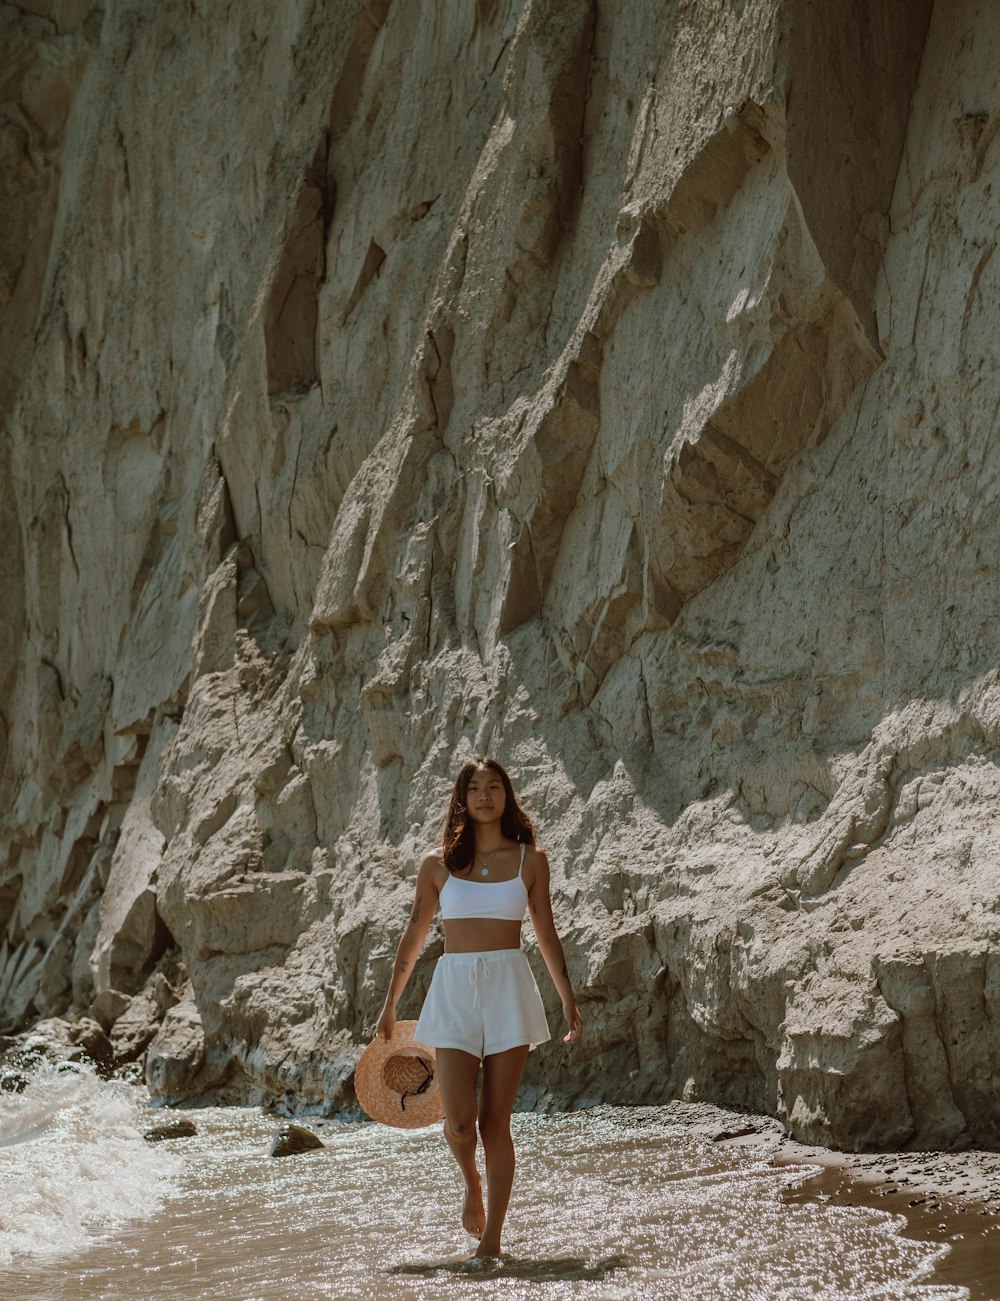 woman in white dress standing on rocky ground during daytime